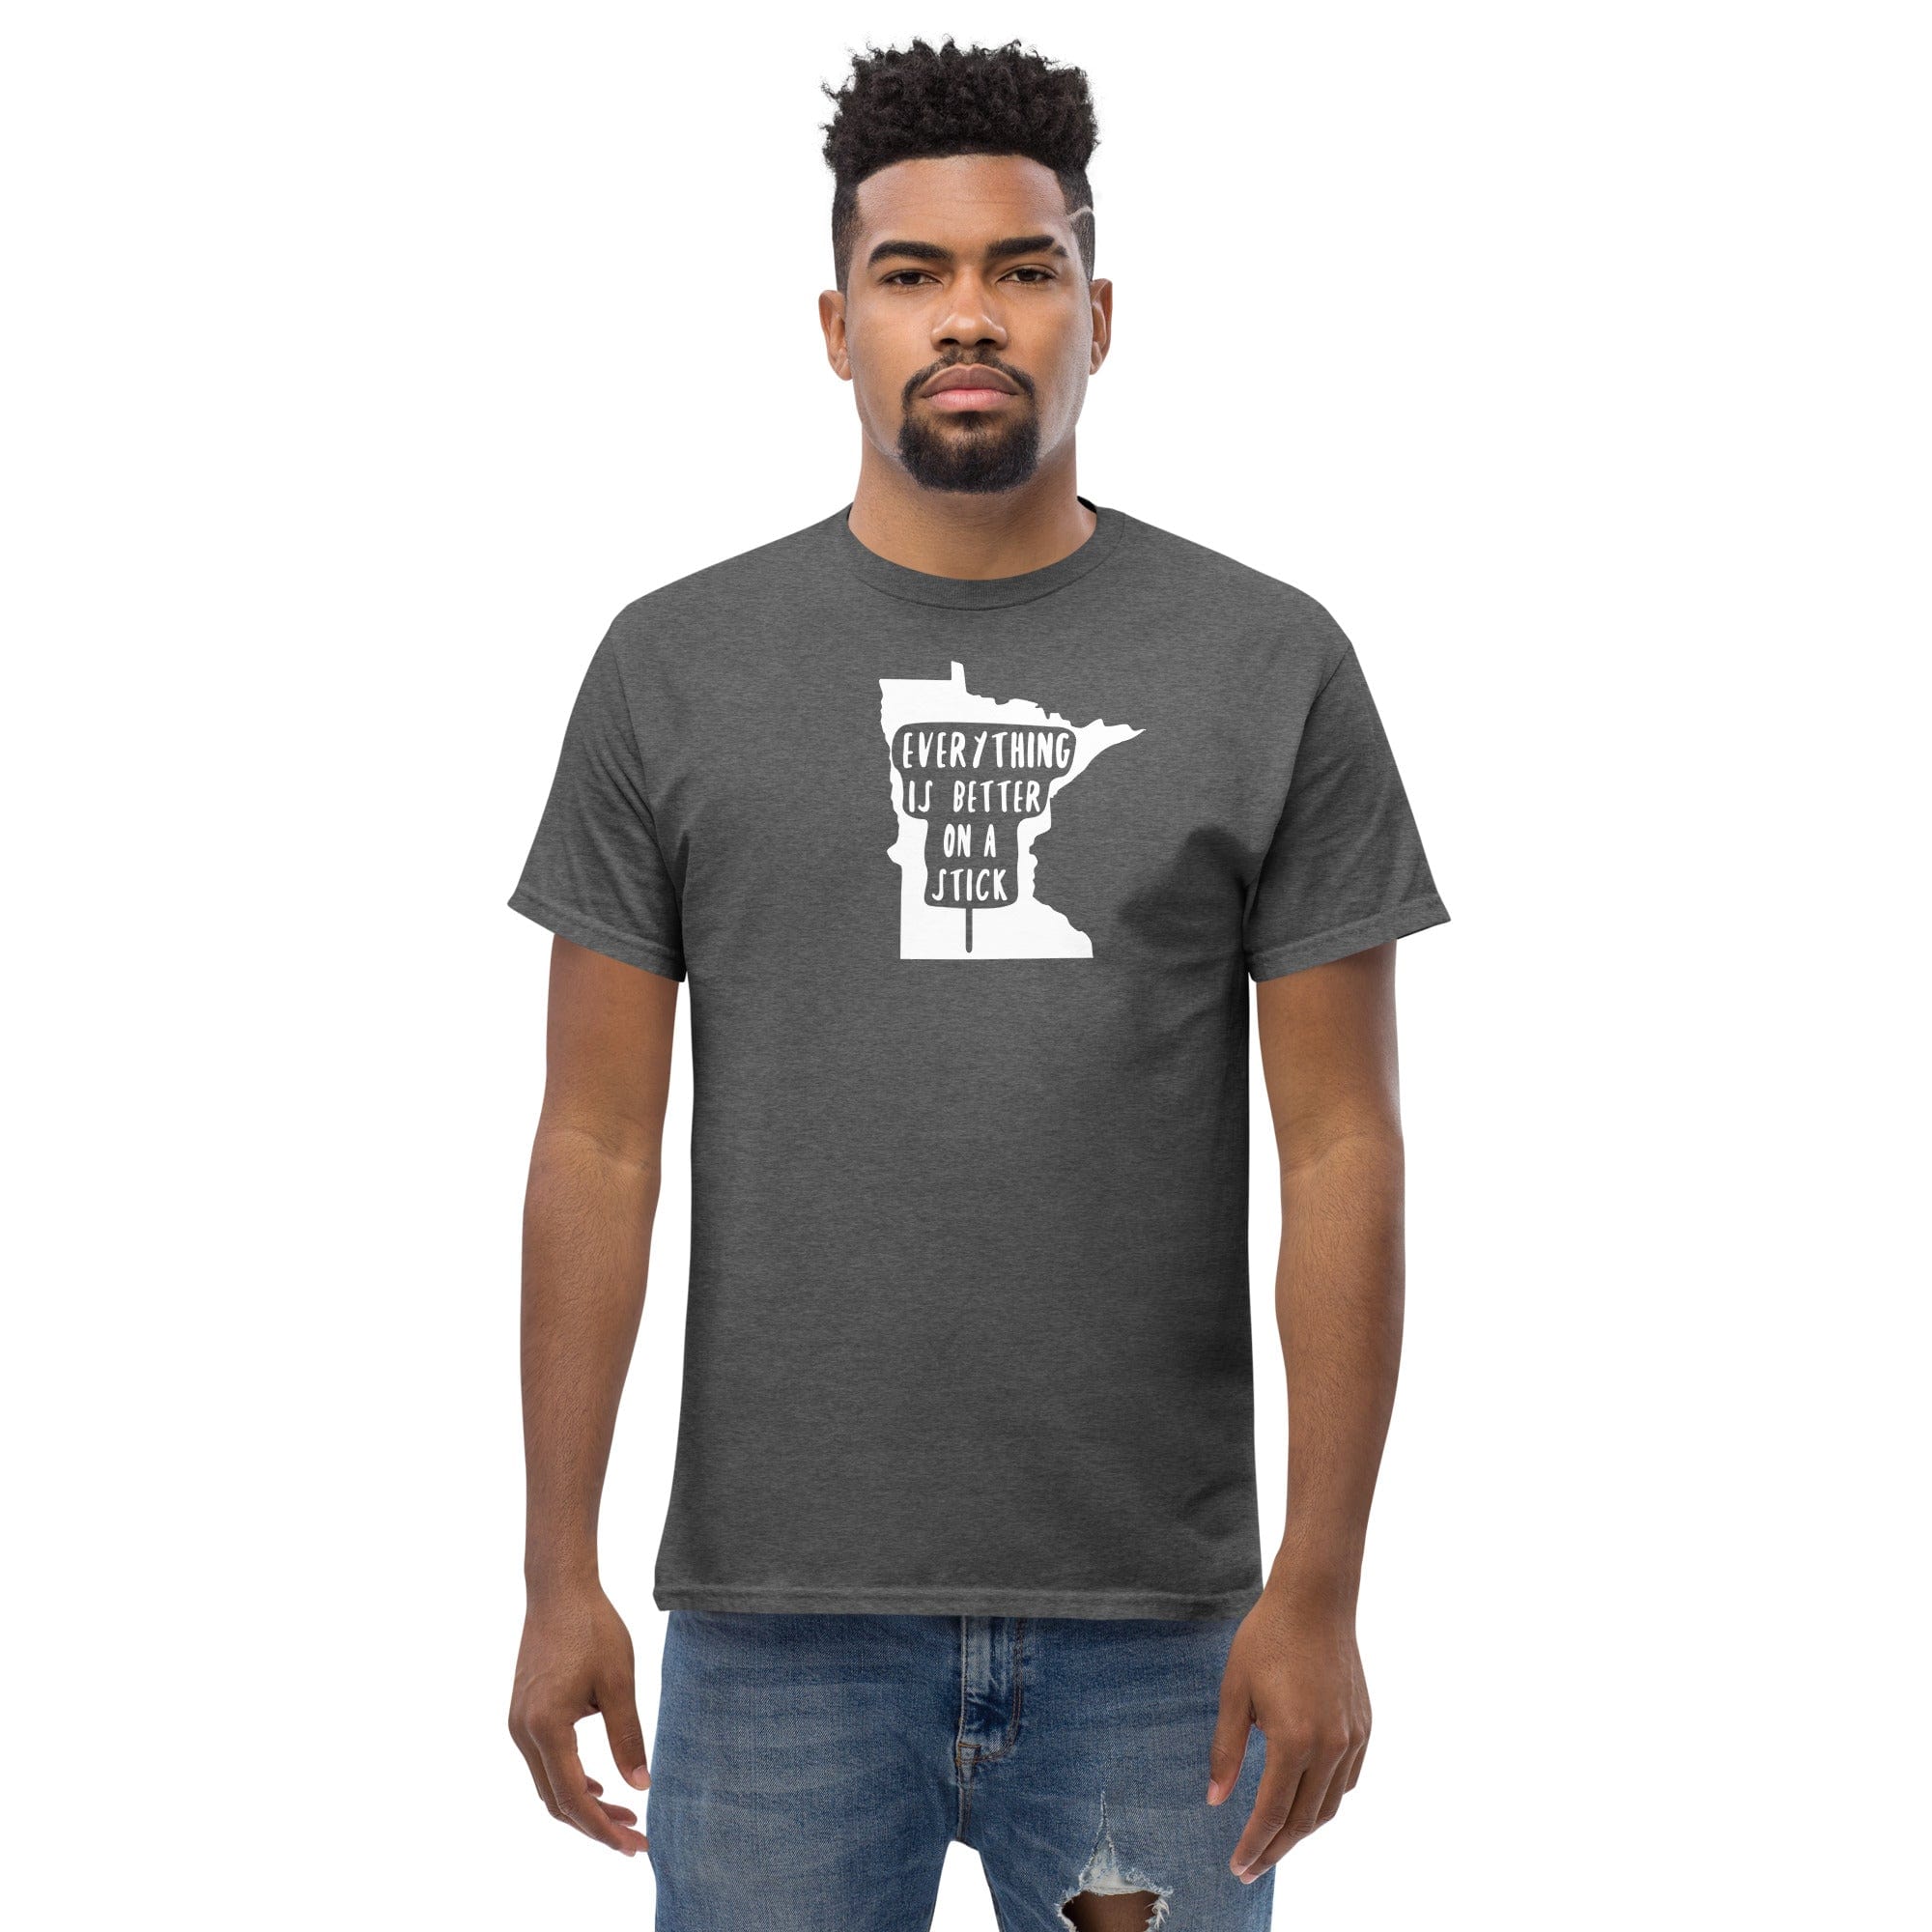 Minnesota State Fair "Everything Is Better on a Stick" Men's Classic Tee ThatMNLife Minnesota Custom T-Shirts and Gifts